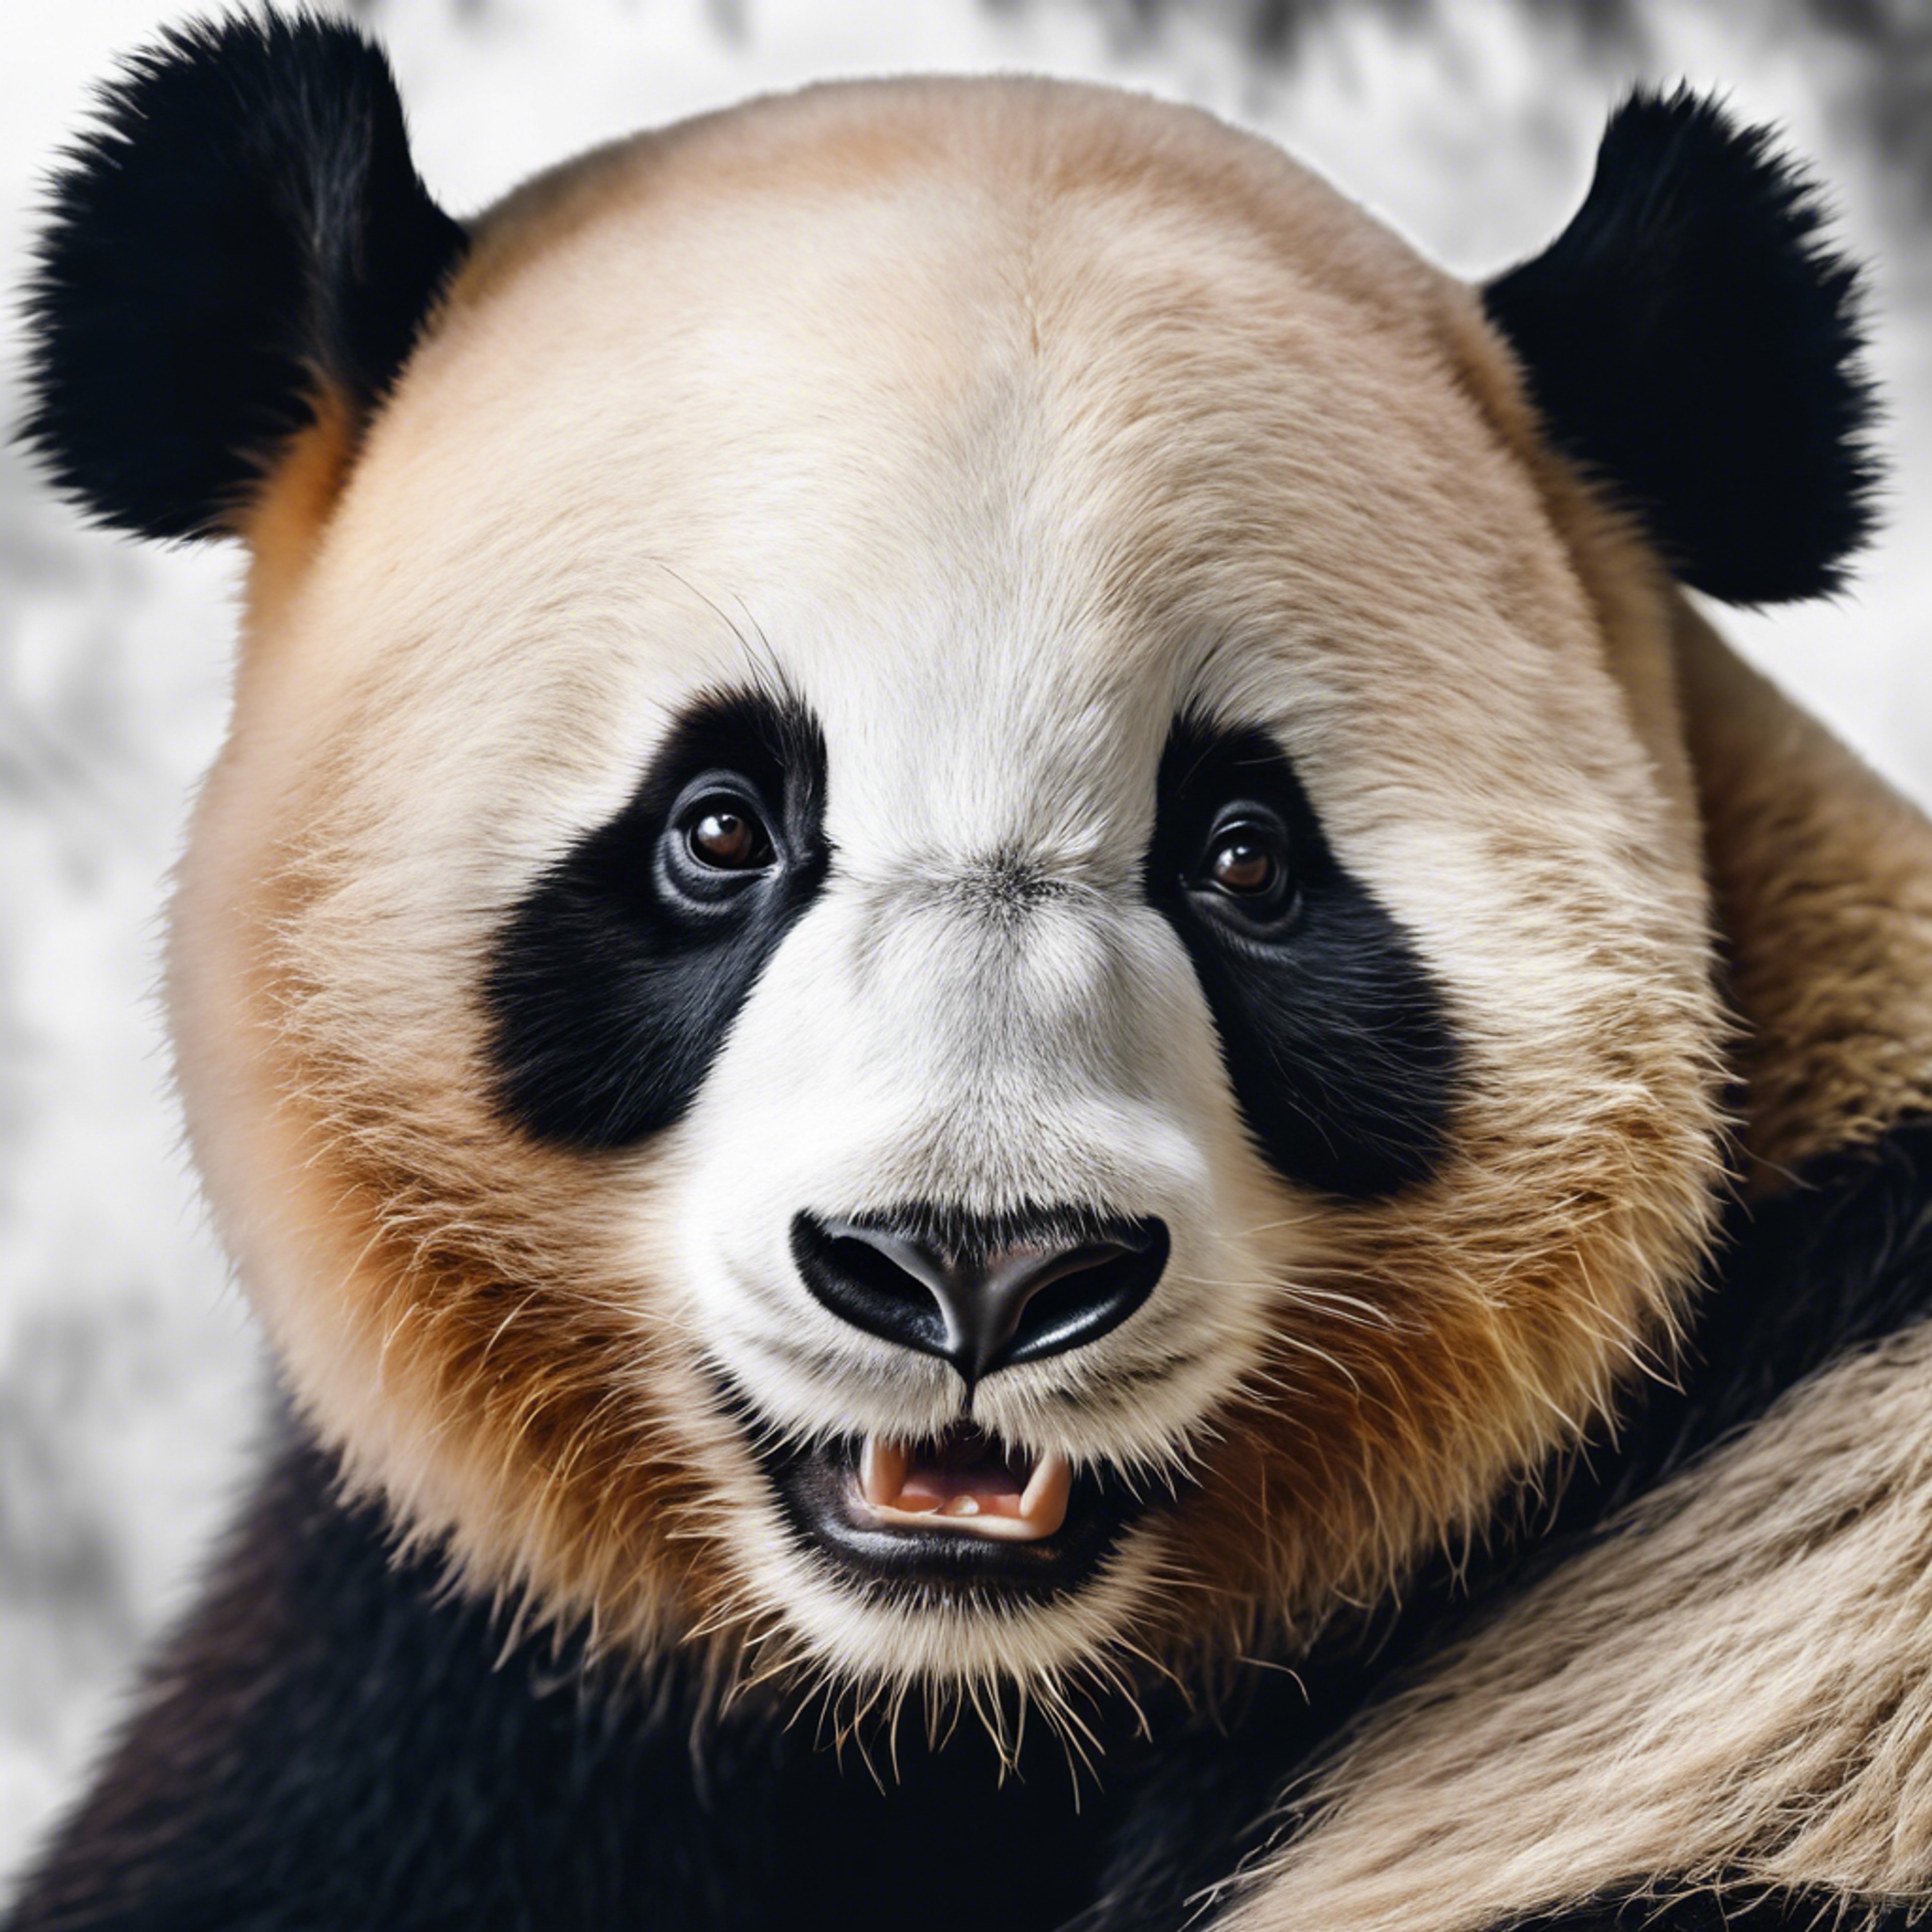 A close-up portrait of a smiling panda, showcasing the joy and charm of this magnificent creature. Kertas dinding[5b22781787714e61bfbc]